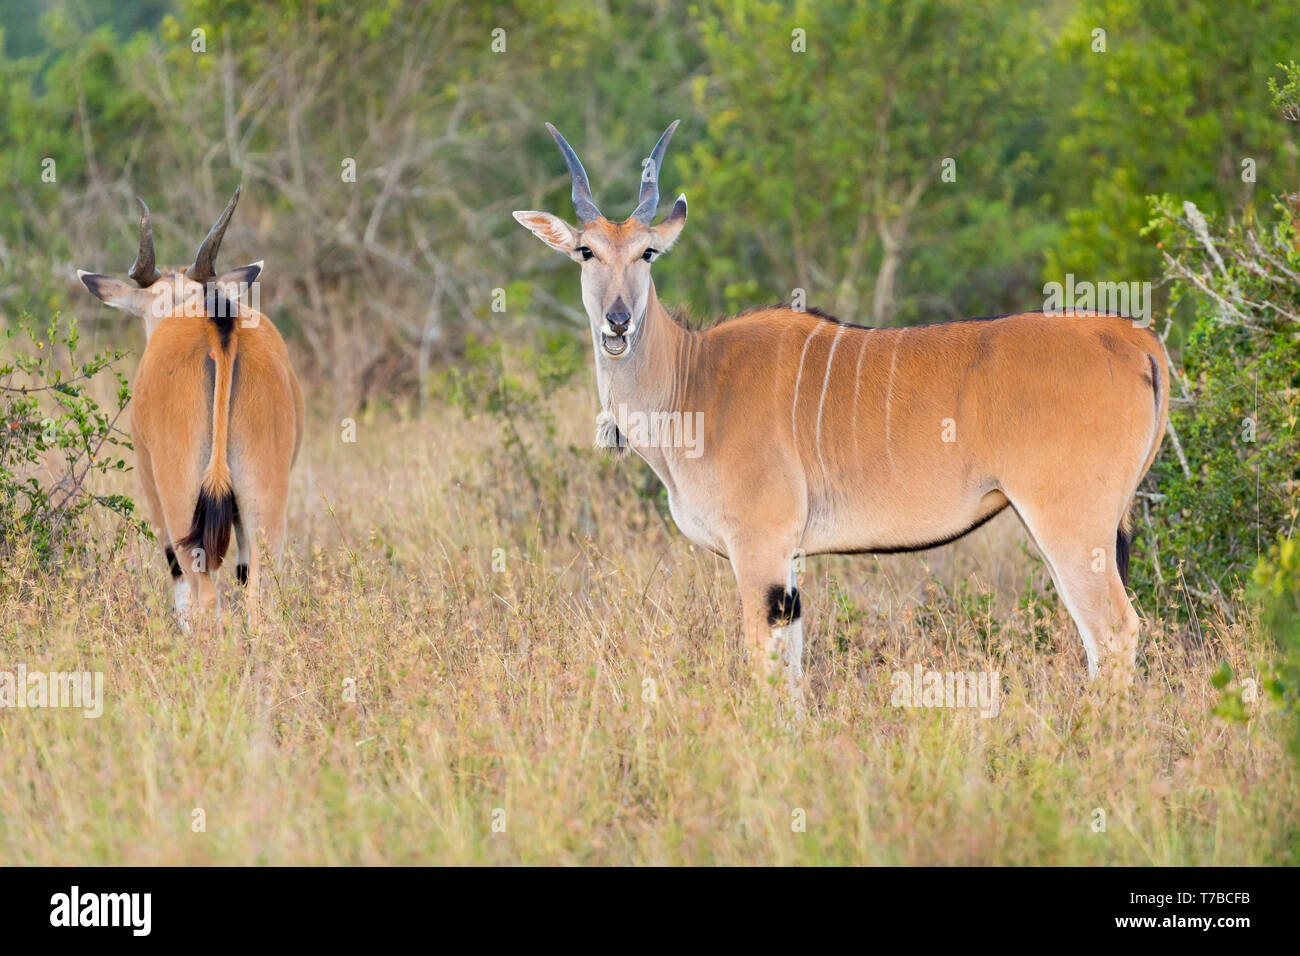 A  Common Eland adult female feeding on the edge of scrubland, looking up, close side view, Ol Pejeta Conservancy, Laikipia, Kenya, Africa Stock Photo